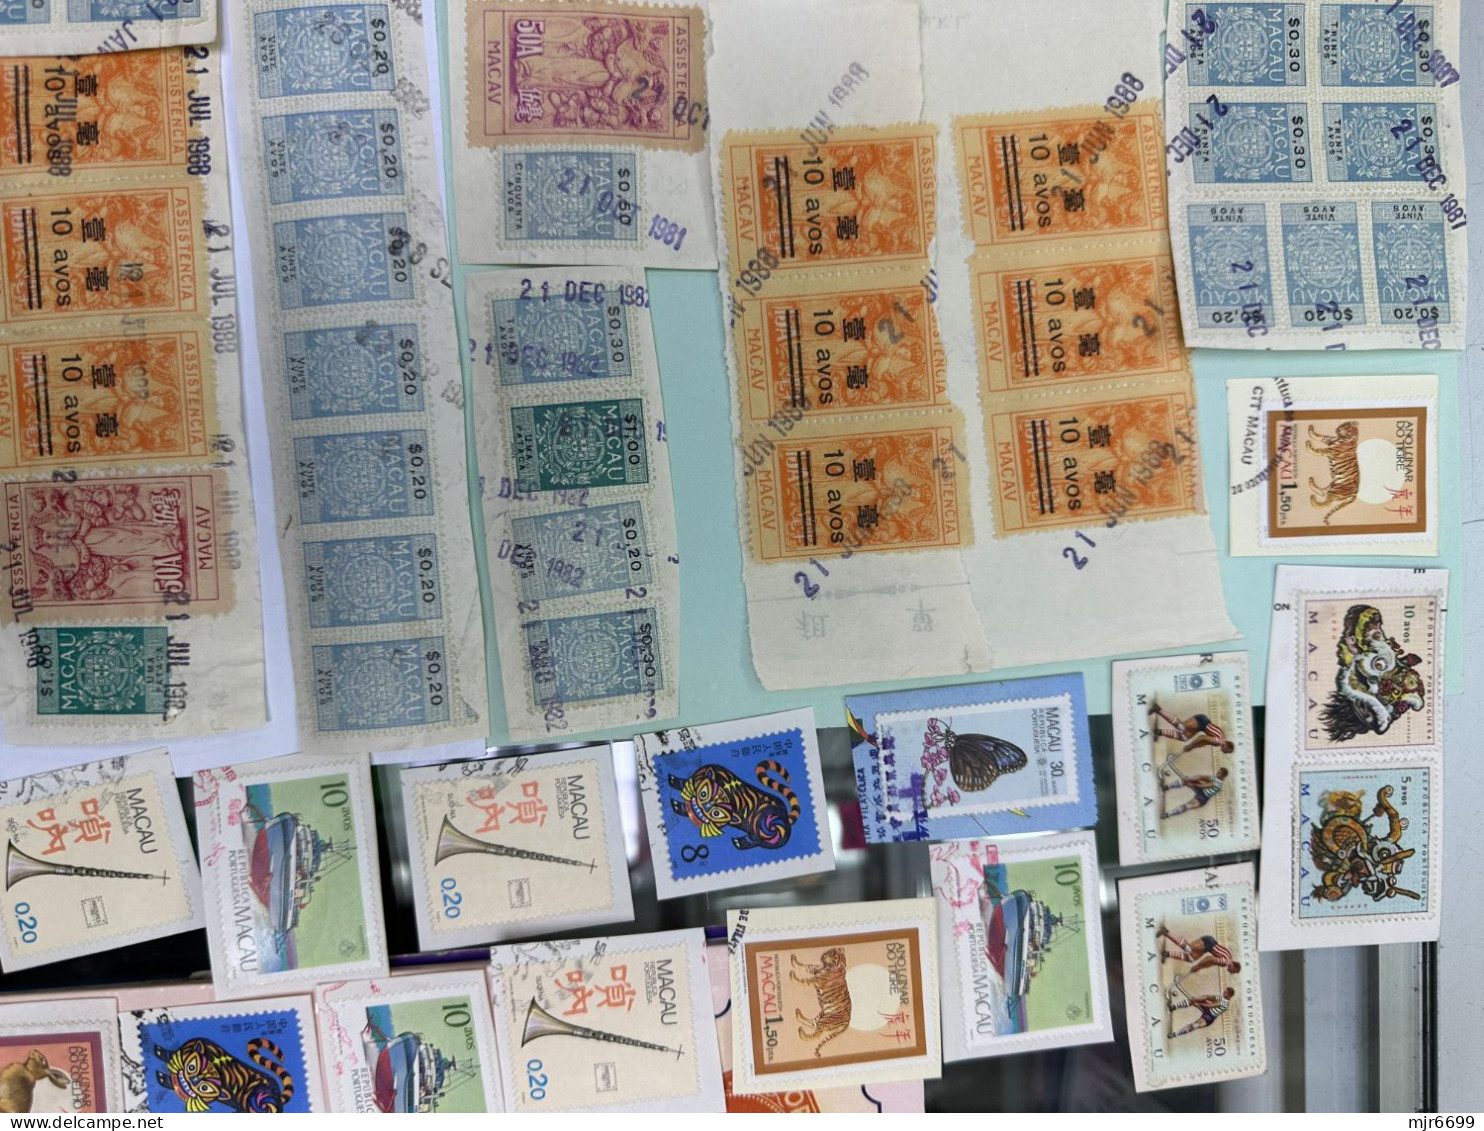 MACAU LOT OF STAMPS AND REVENUES ON PAPER, PLEASE SEE THE PHOTOS, AS LOW AS 50CENTS EACH - Colecciones & Series